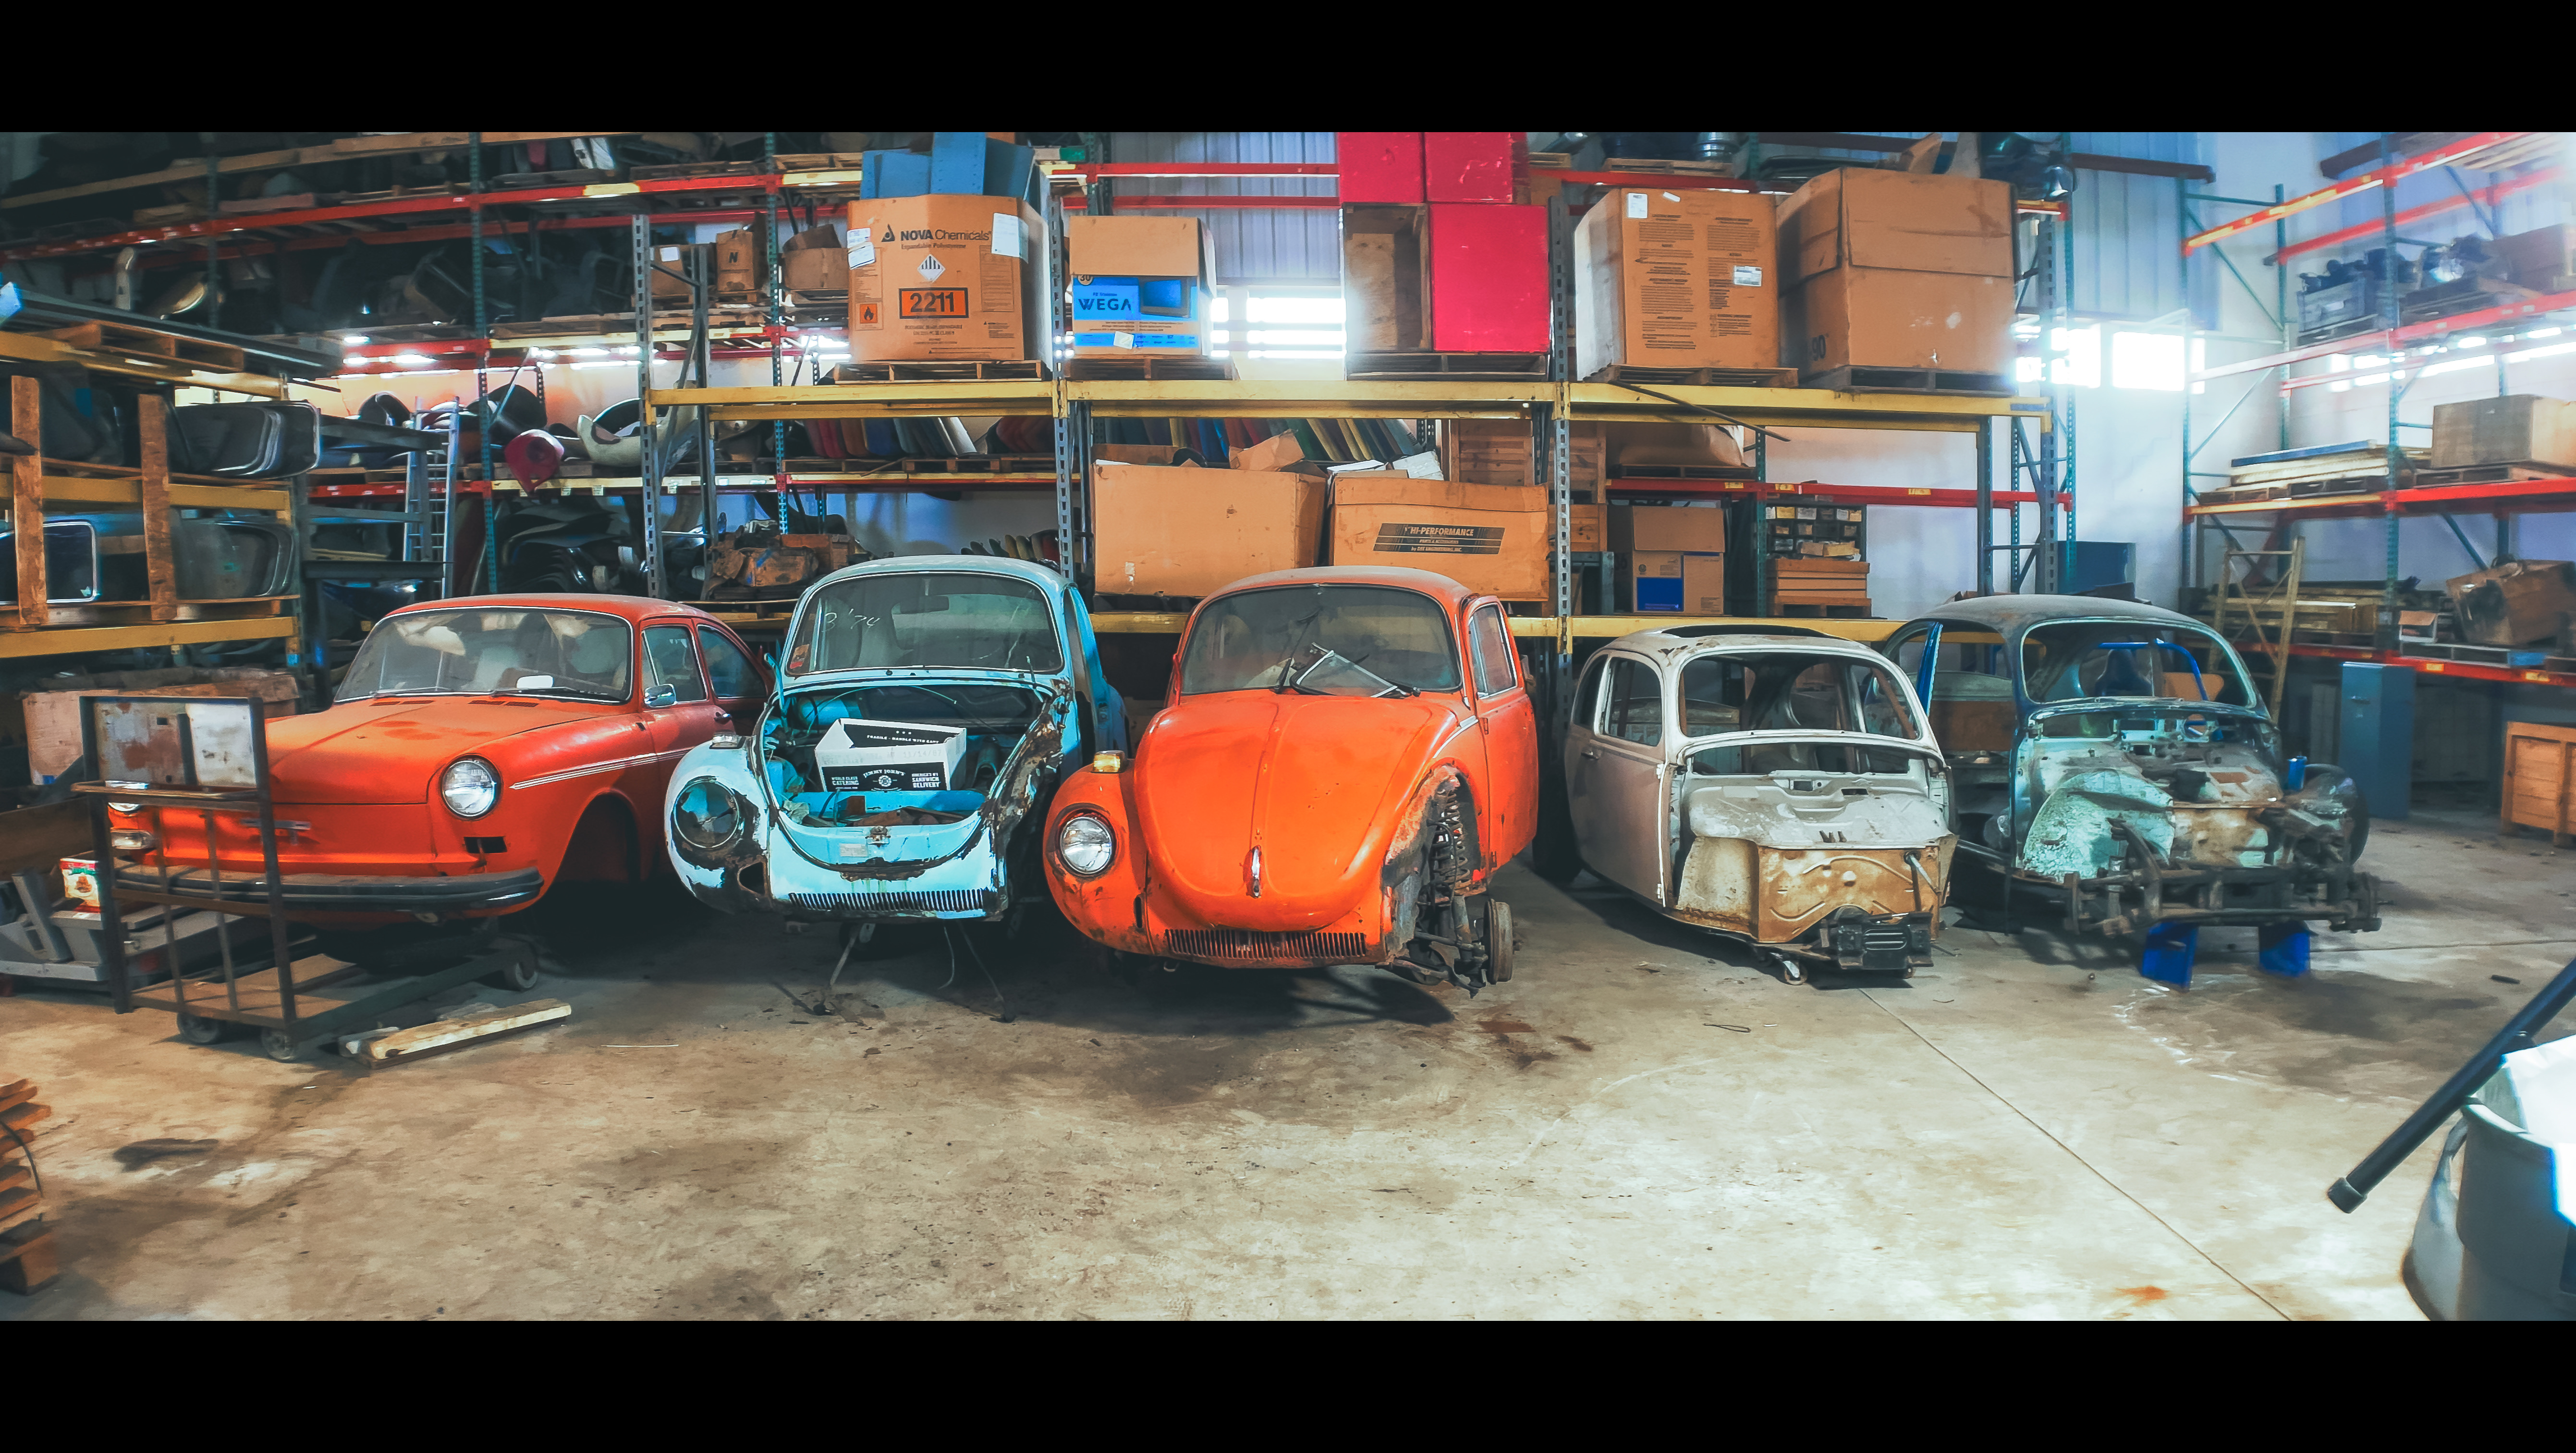 STRIPPED DOWN VW VOLKSWAGEN TYPE 1’s & TYPE 3 FOR SALE - RESTORATIONS & SALVAGE